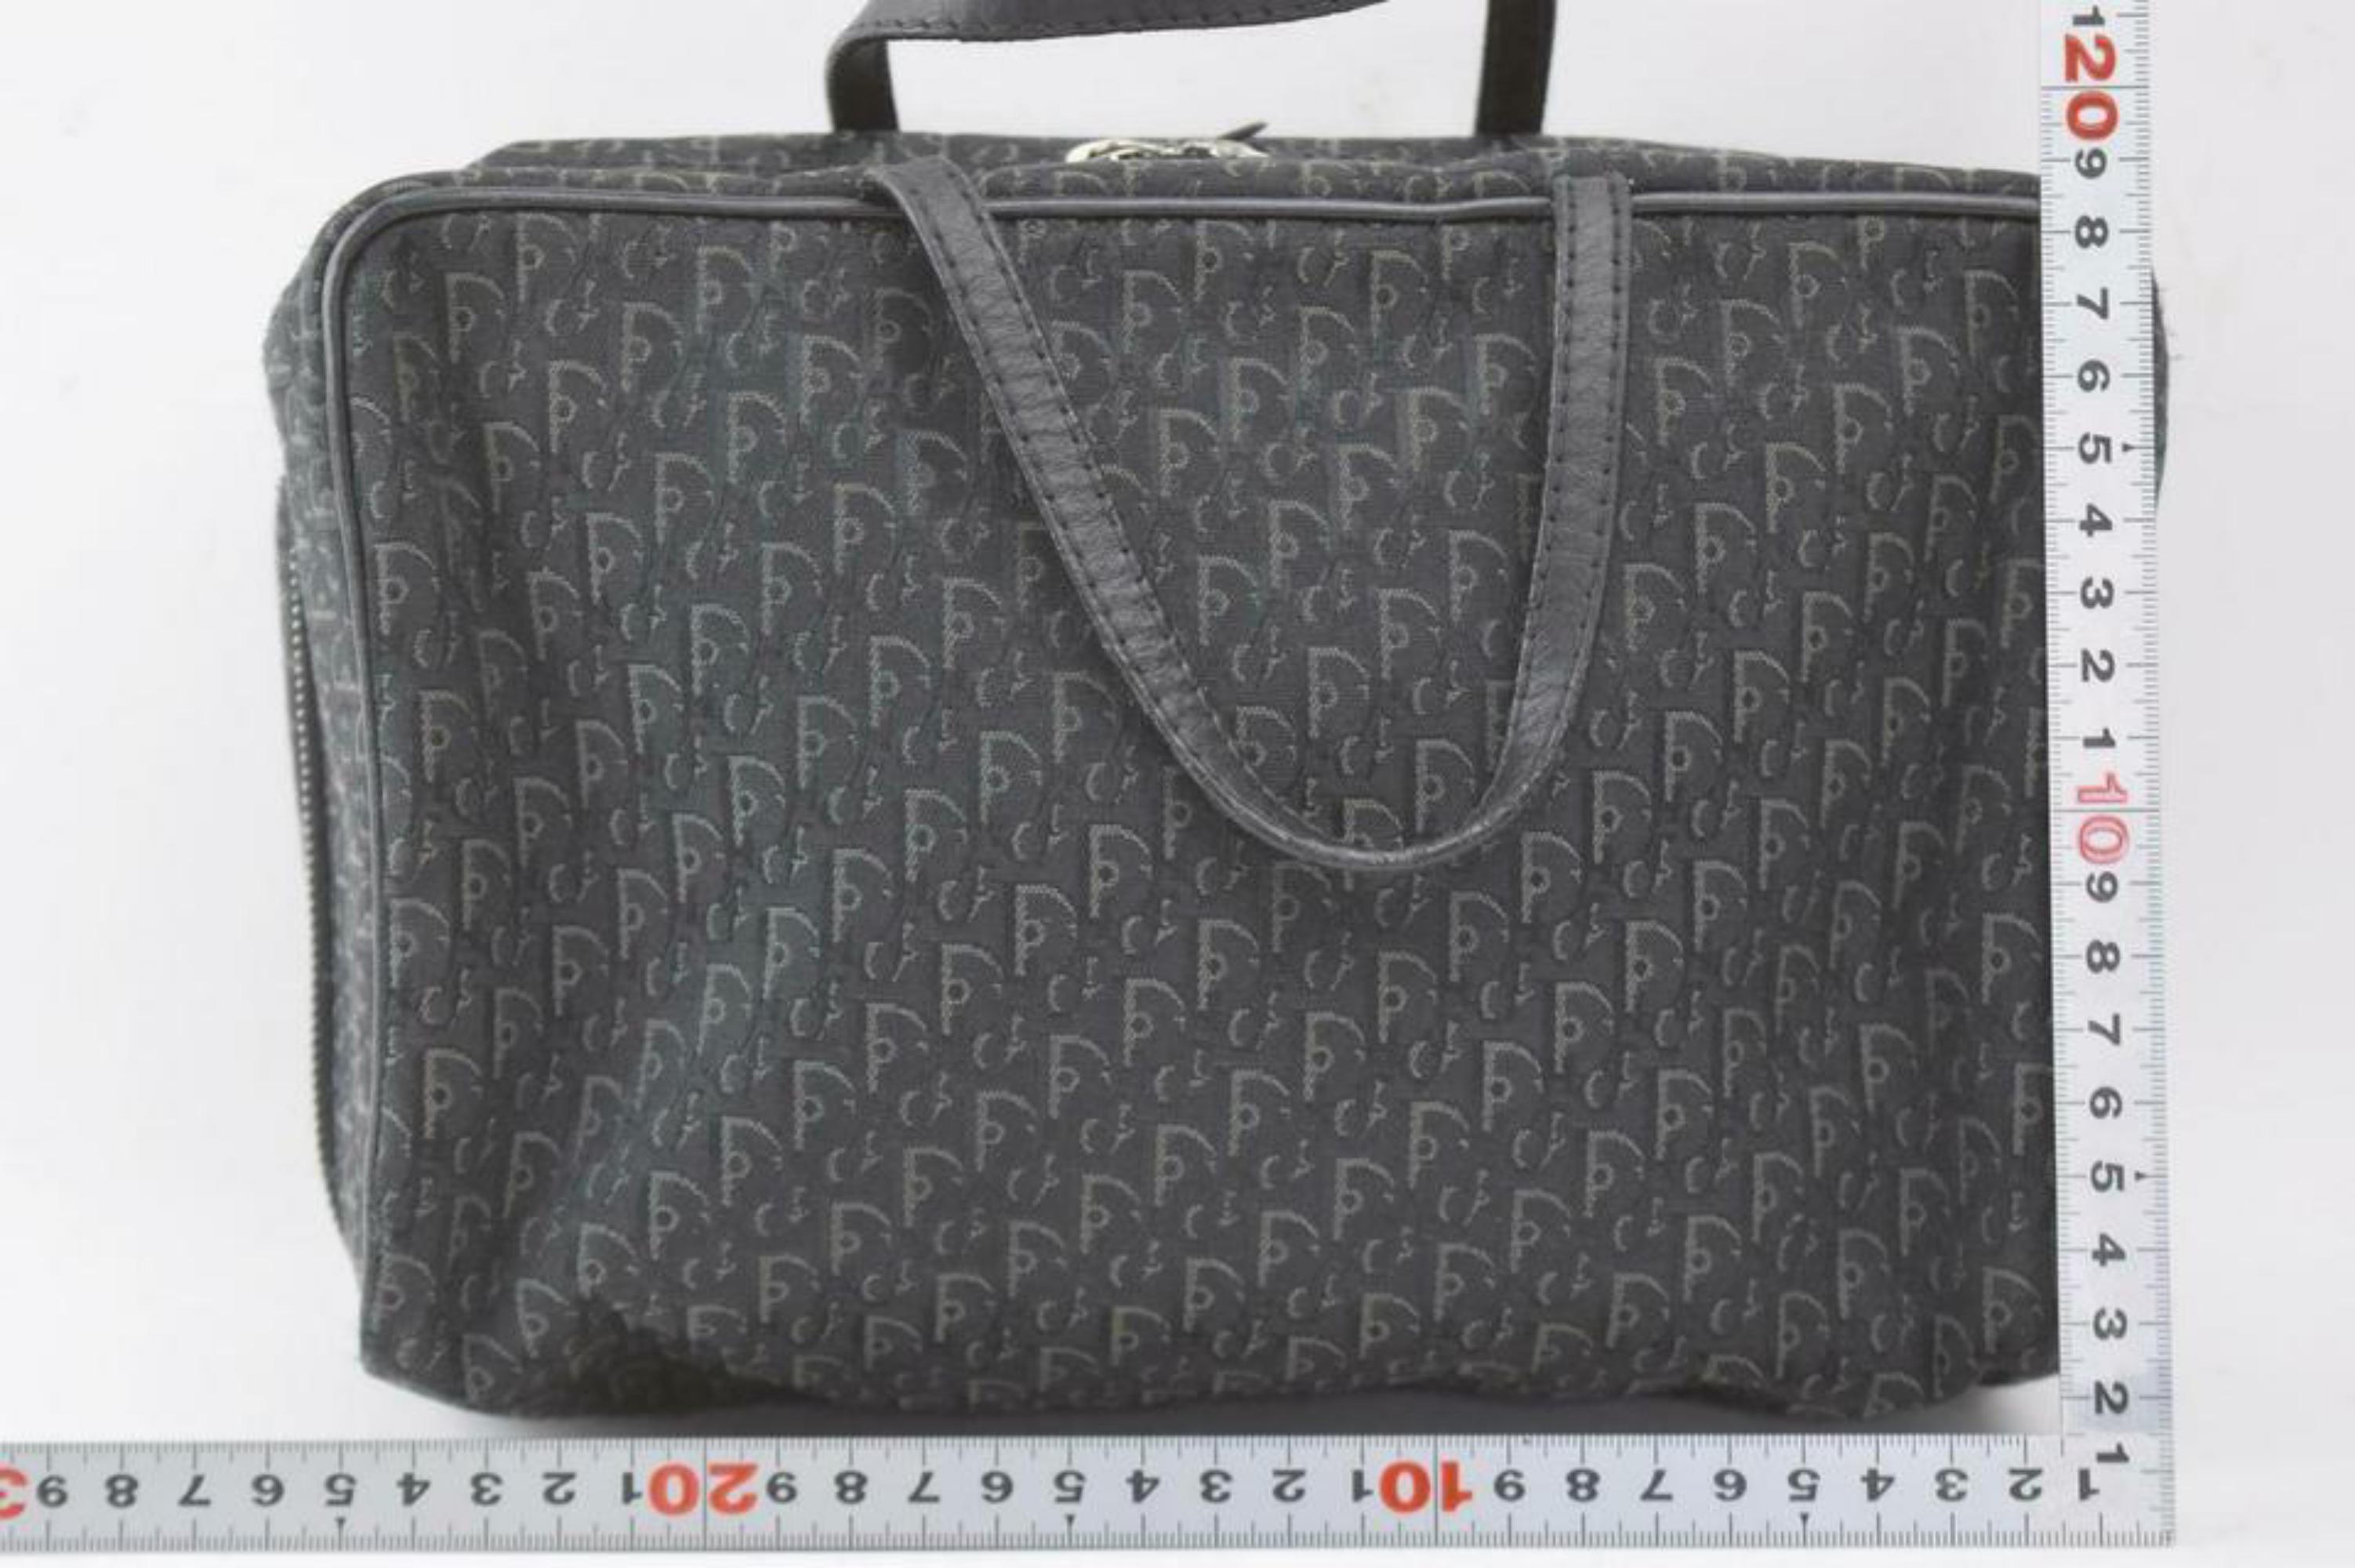 Dior Monogram Oblique Trotter Signature  Satchel 870258 Black Canvas Travel Bag In Good Condition For Sale In Forest Hills, NY